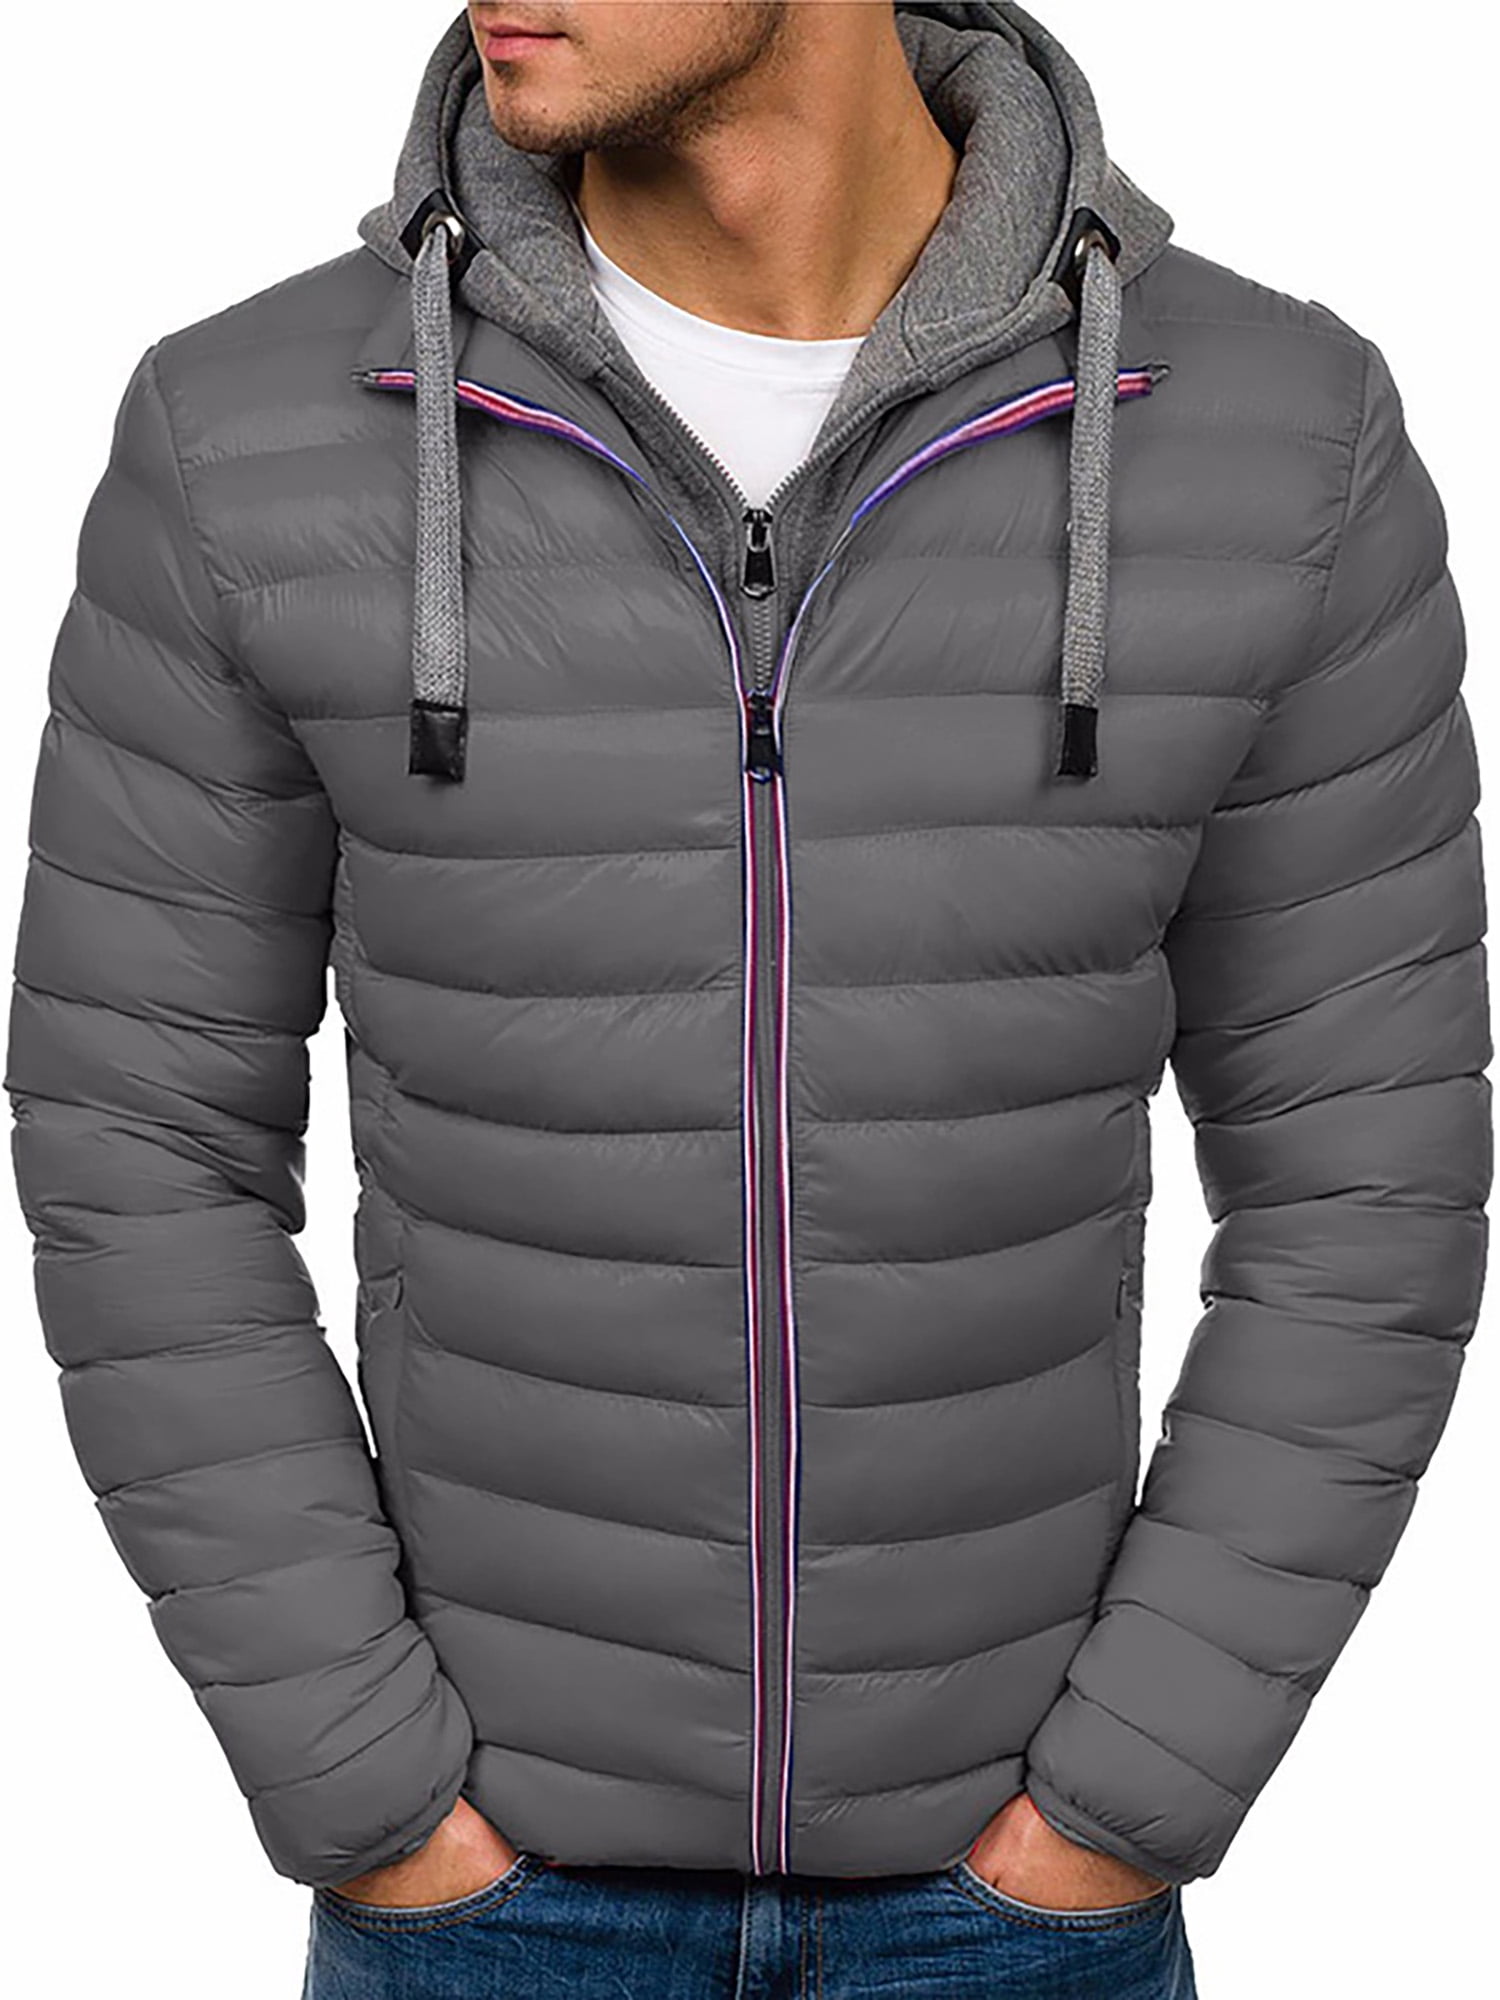 Generic Mens Casual Hood Winter Front-Zip Quilted Slim Fit Thick Down Jacket Coat